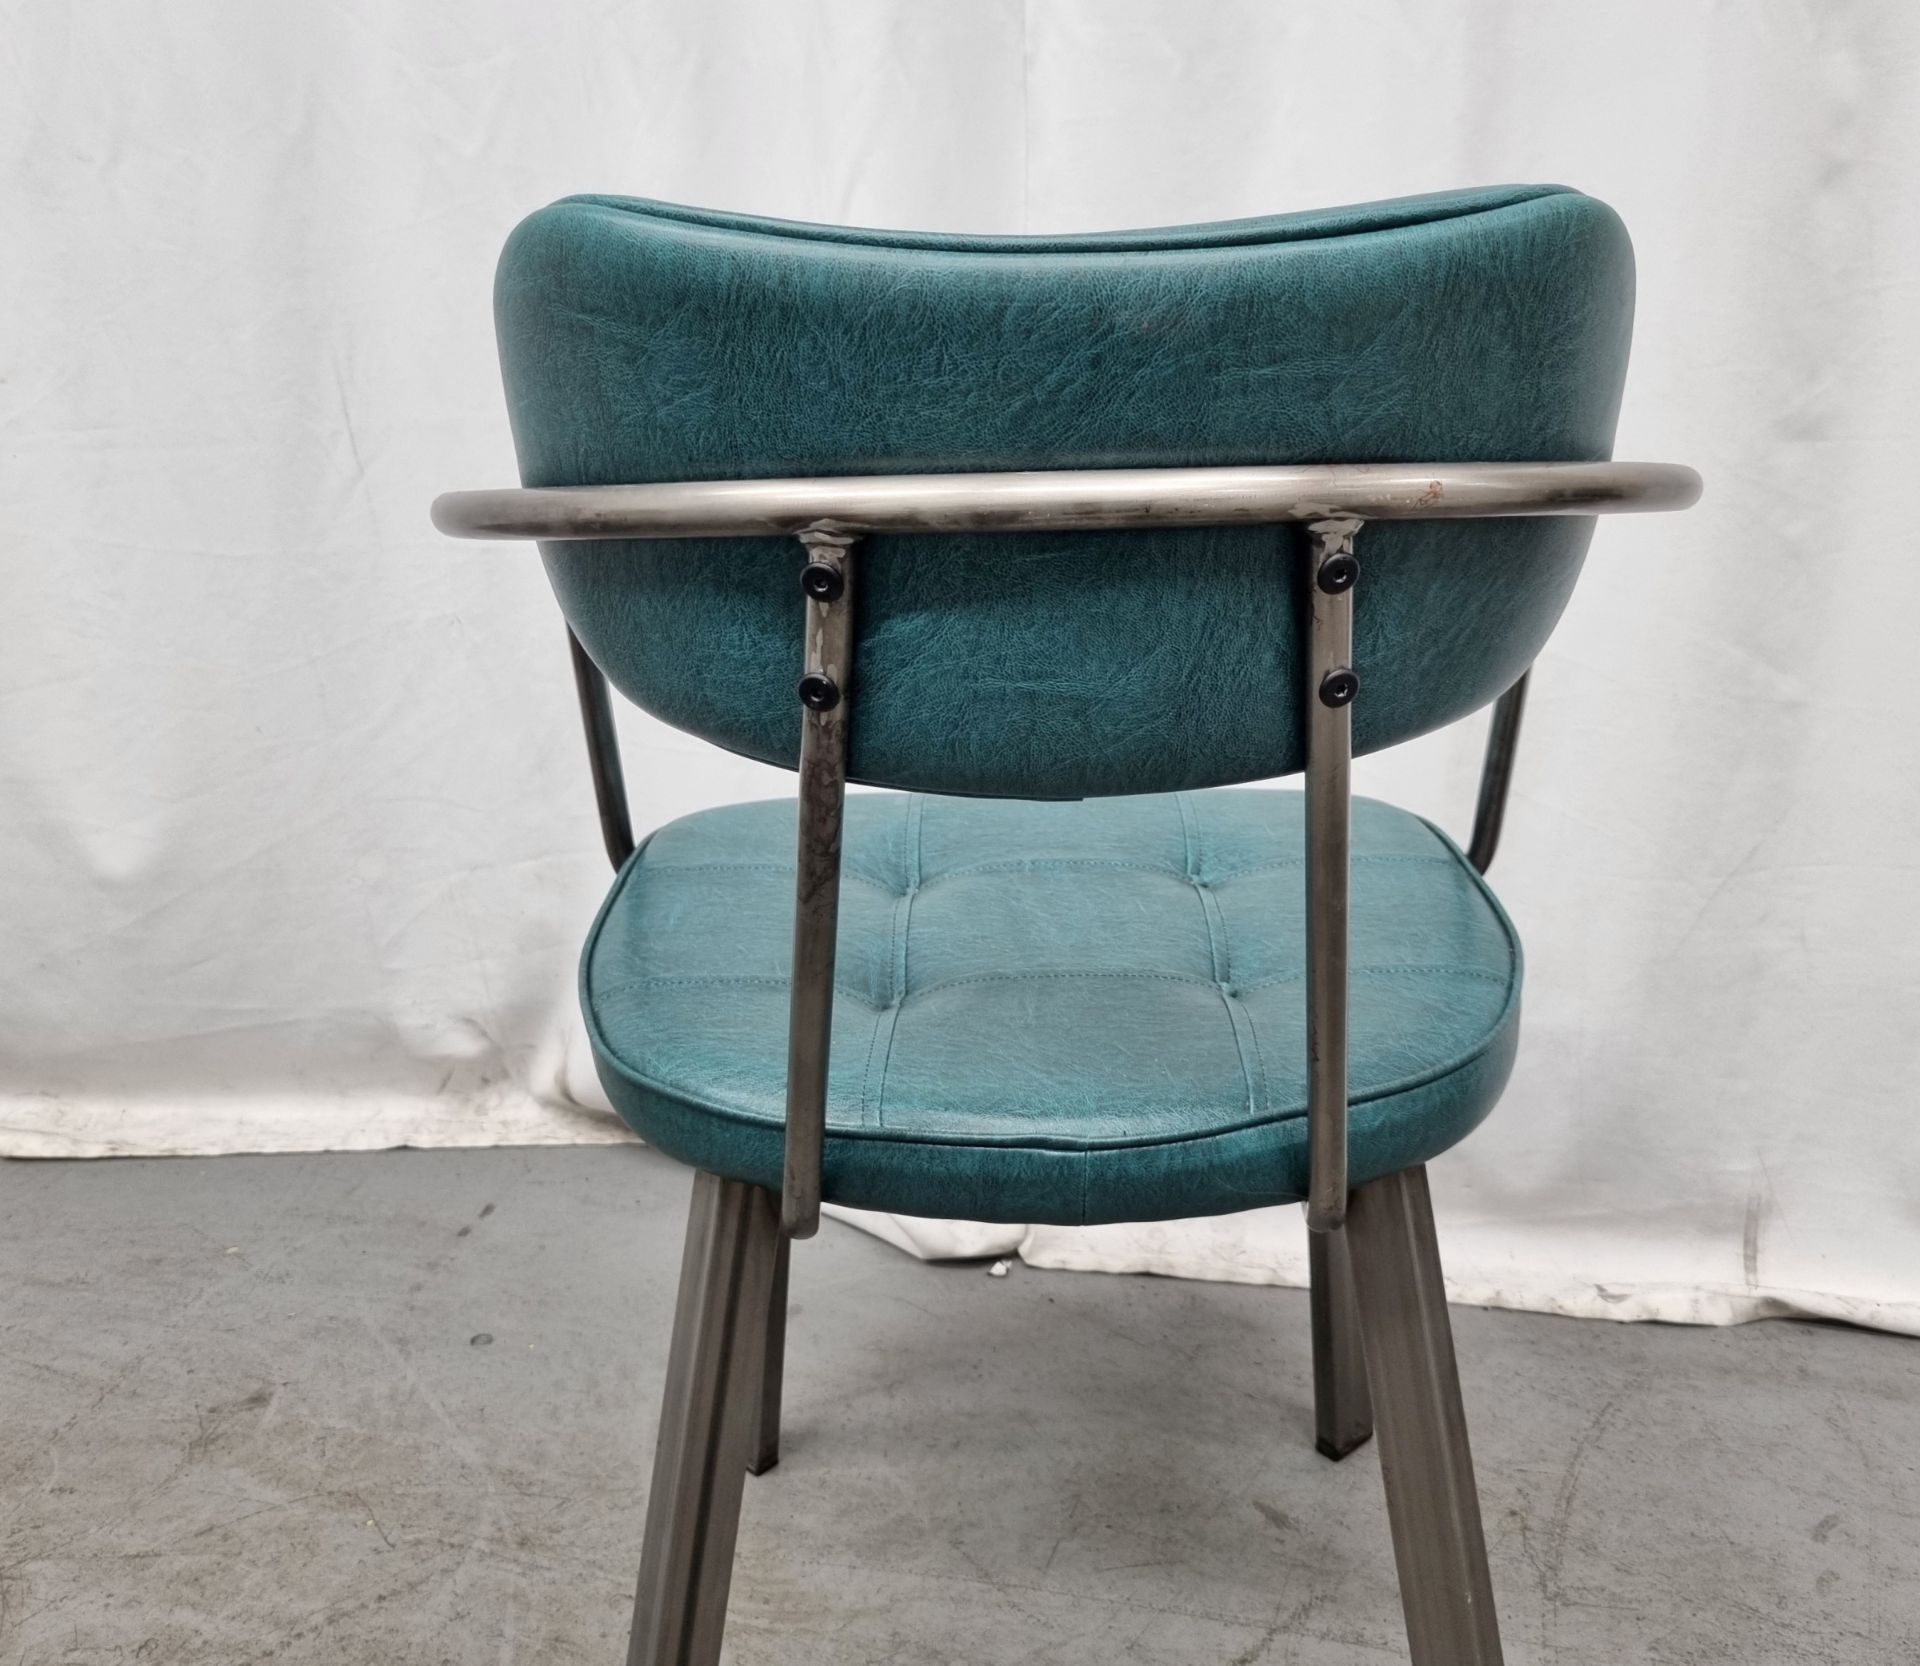 4x Industrial green leather restaurant chairs - L 550 x W 600 x H 80cm - Image 12 of 13